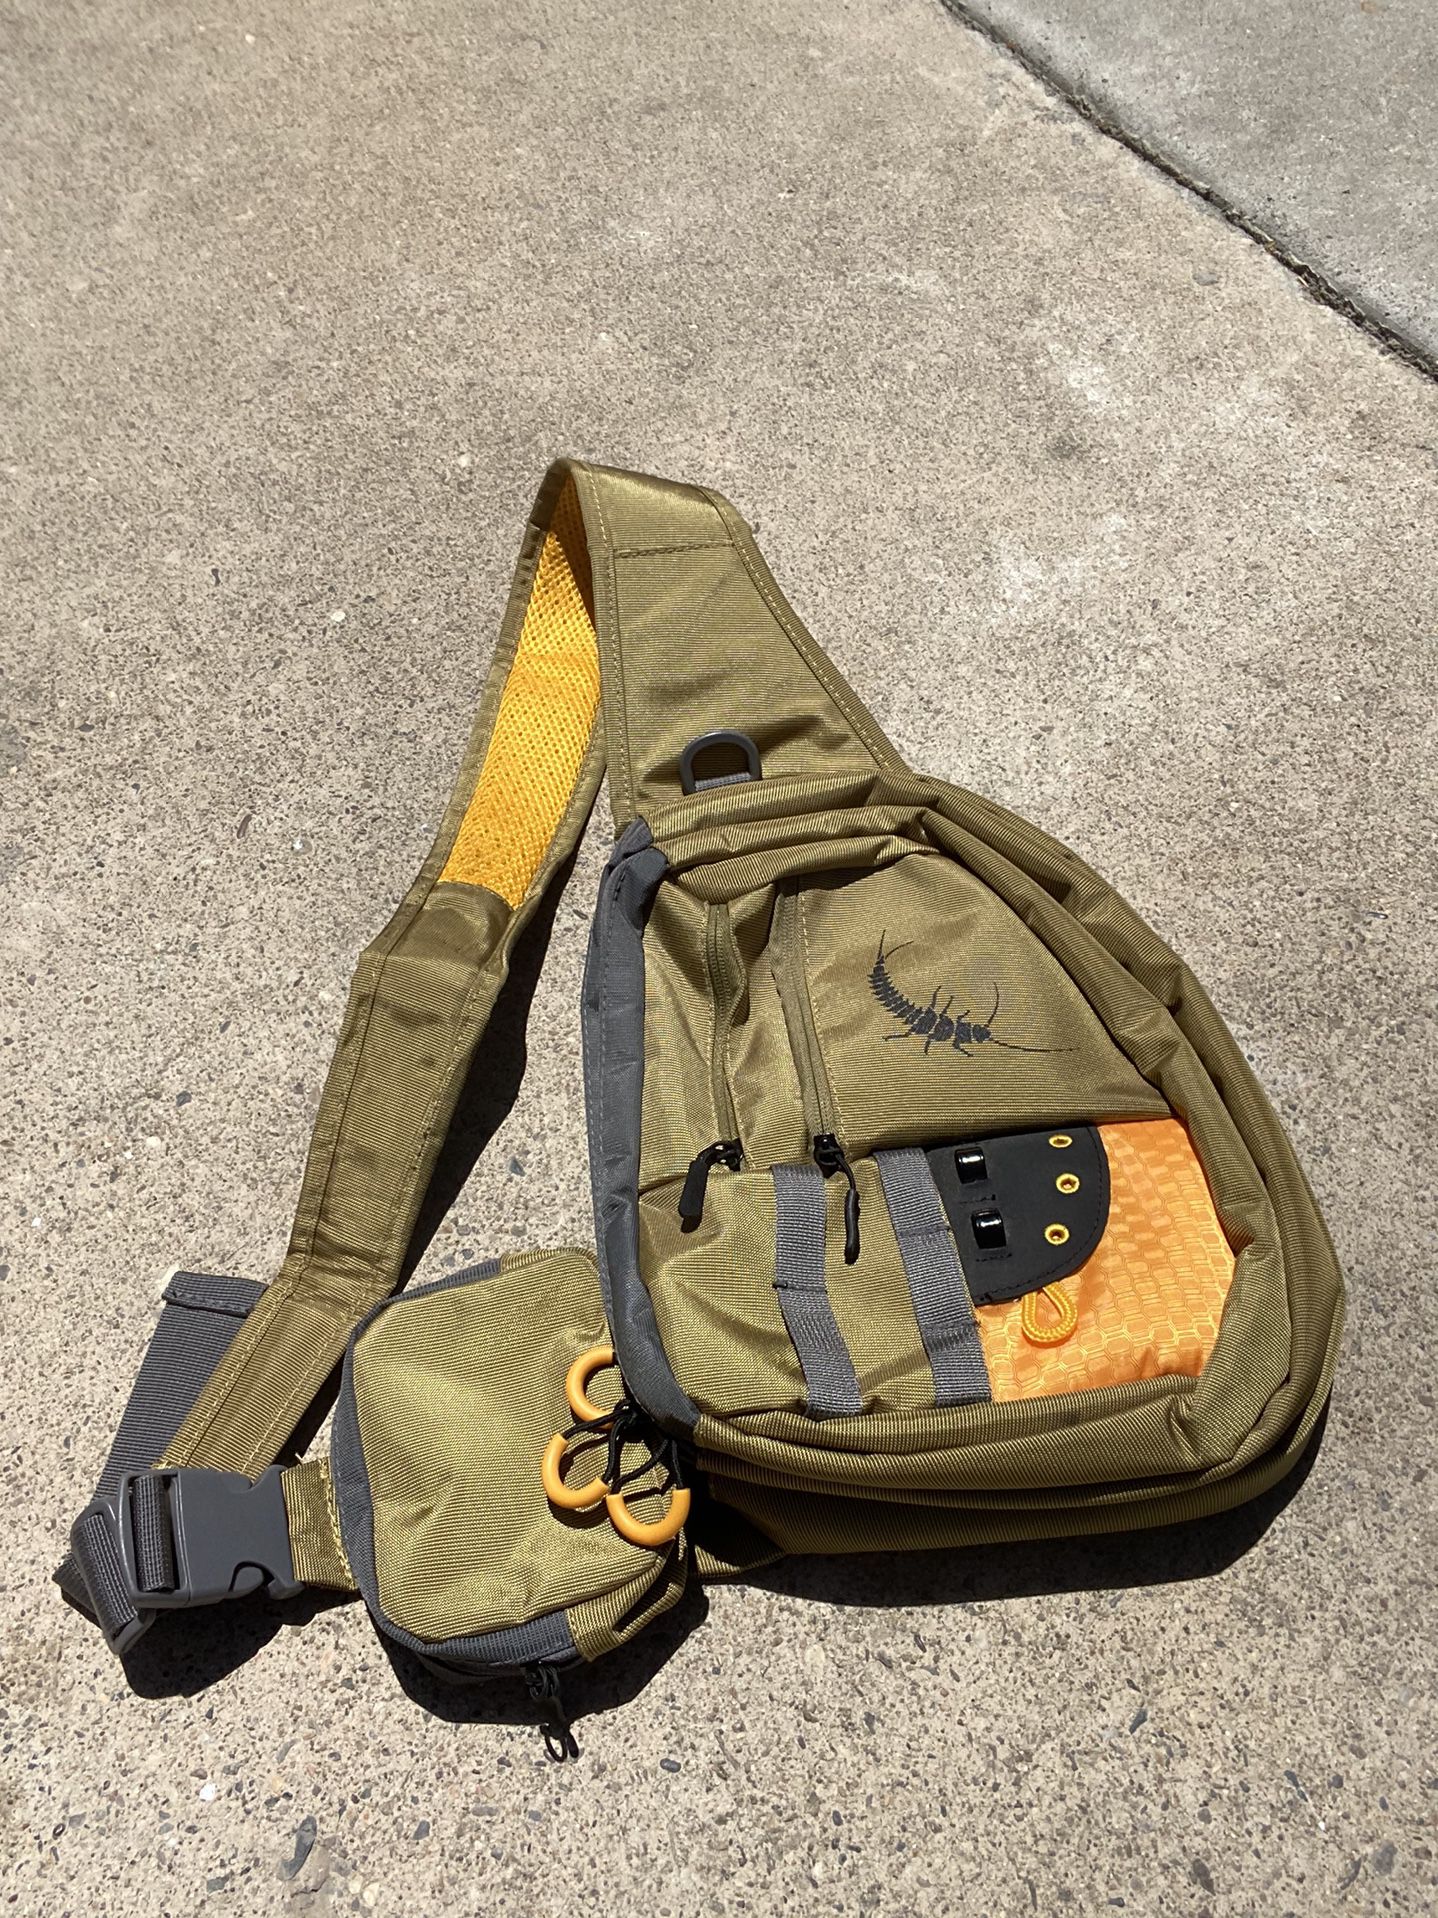 White River Fly Fishing Vangaurd XL Sling Pack Trout Fishing Bag for Sale  in Rio Vista, CA - OfferUp